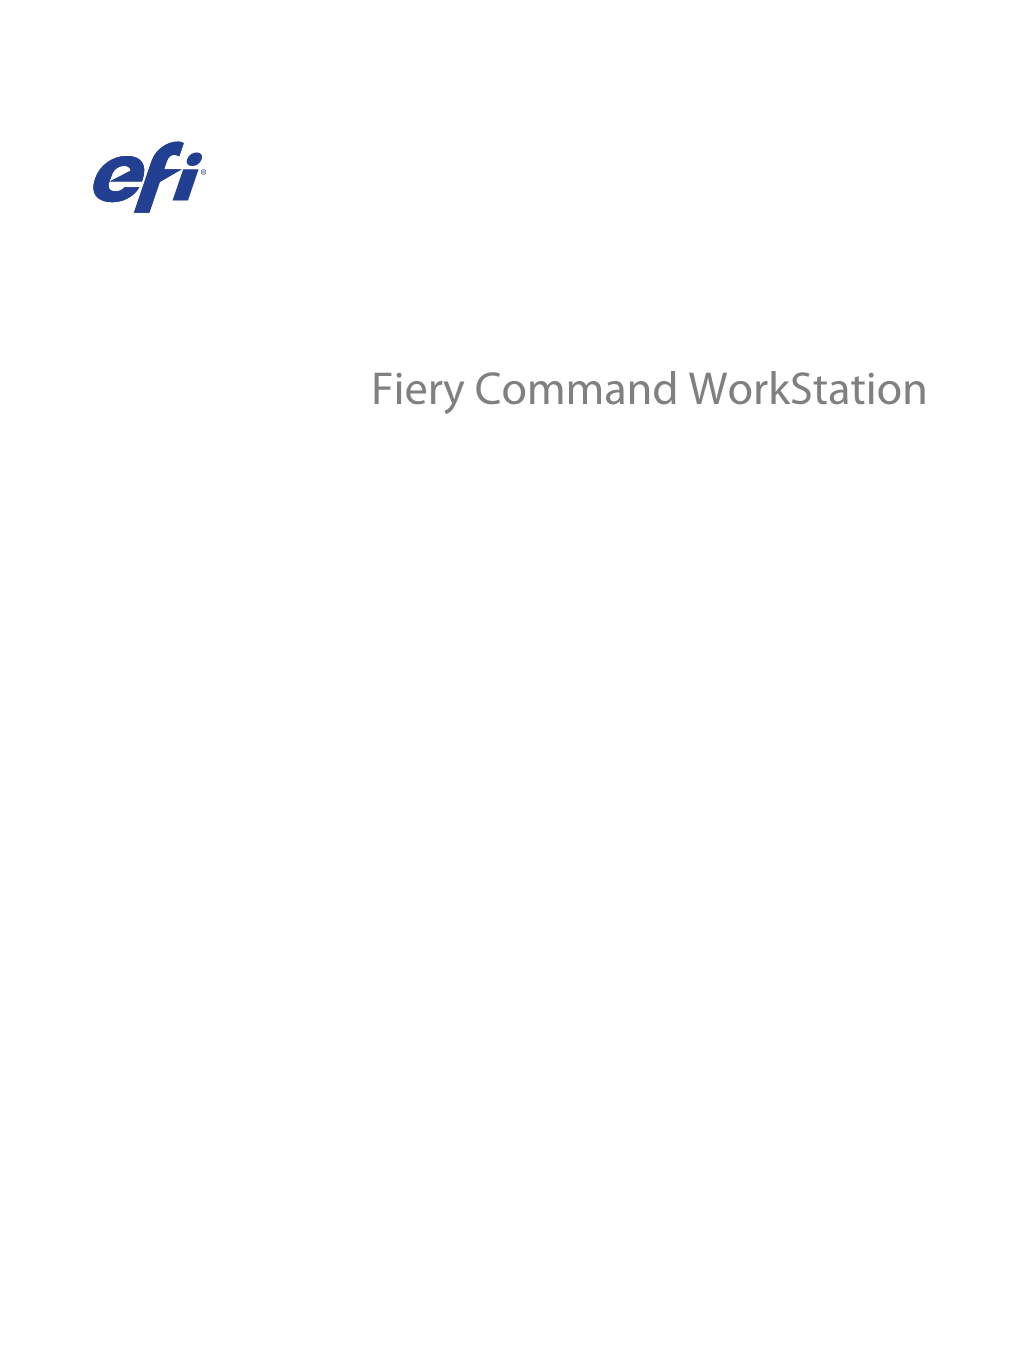 Fiery Command Workstation © 2017 Electronics for Imaging, Inc